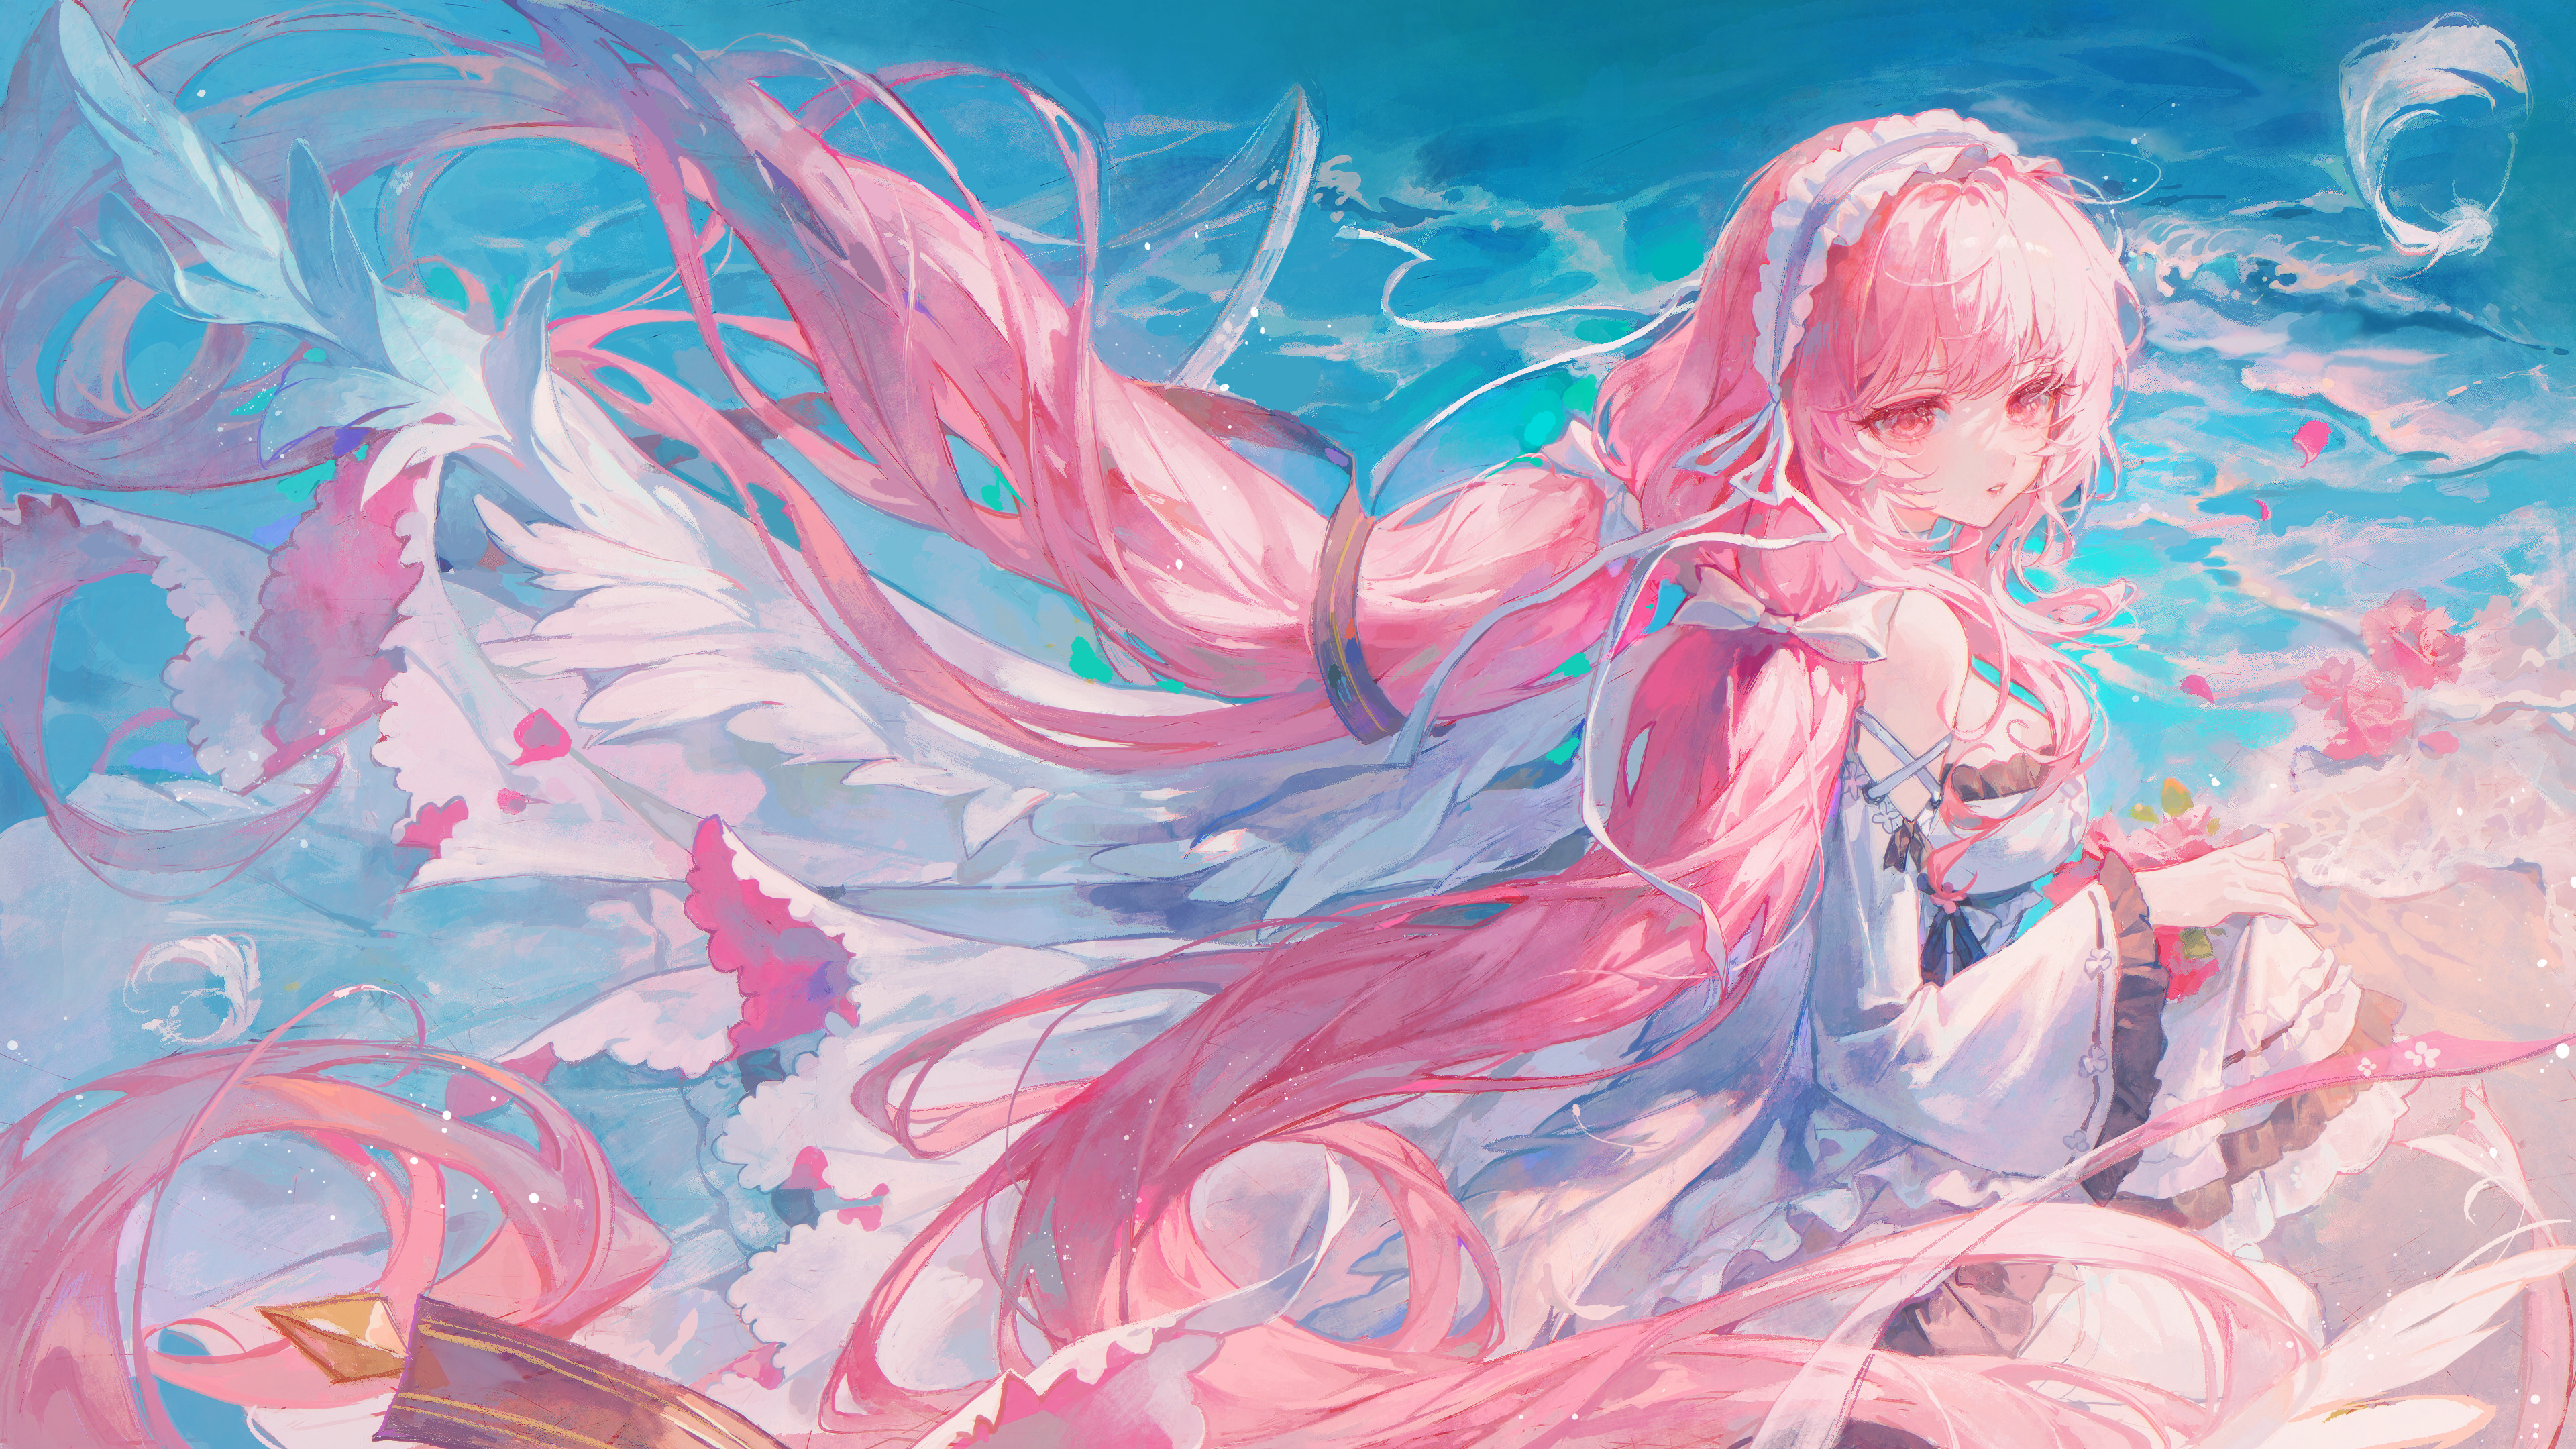 200+] Pink Anime Aesthetic Wallpapers | Wallpapers.com-demhanvico.com.vn